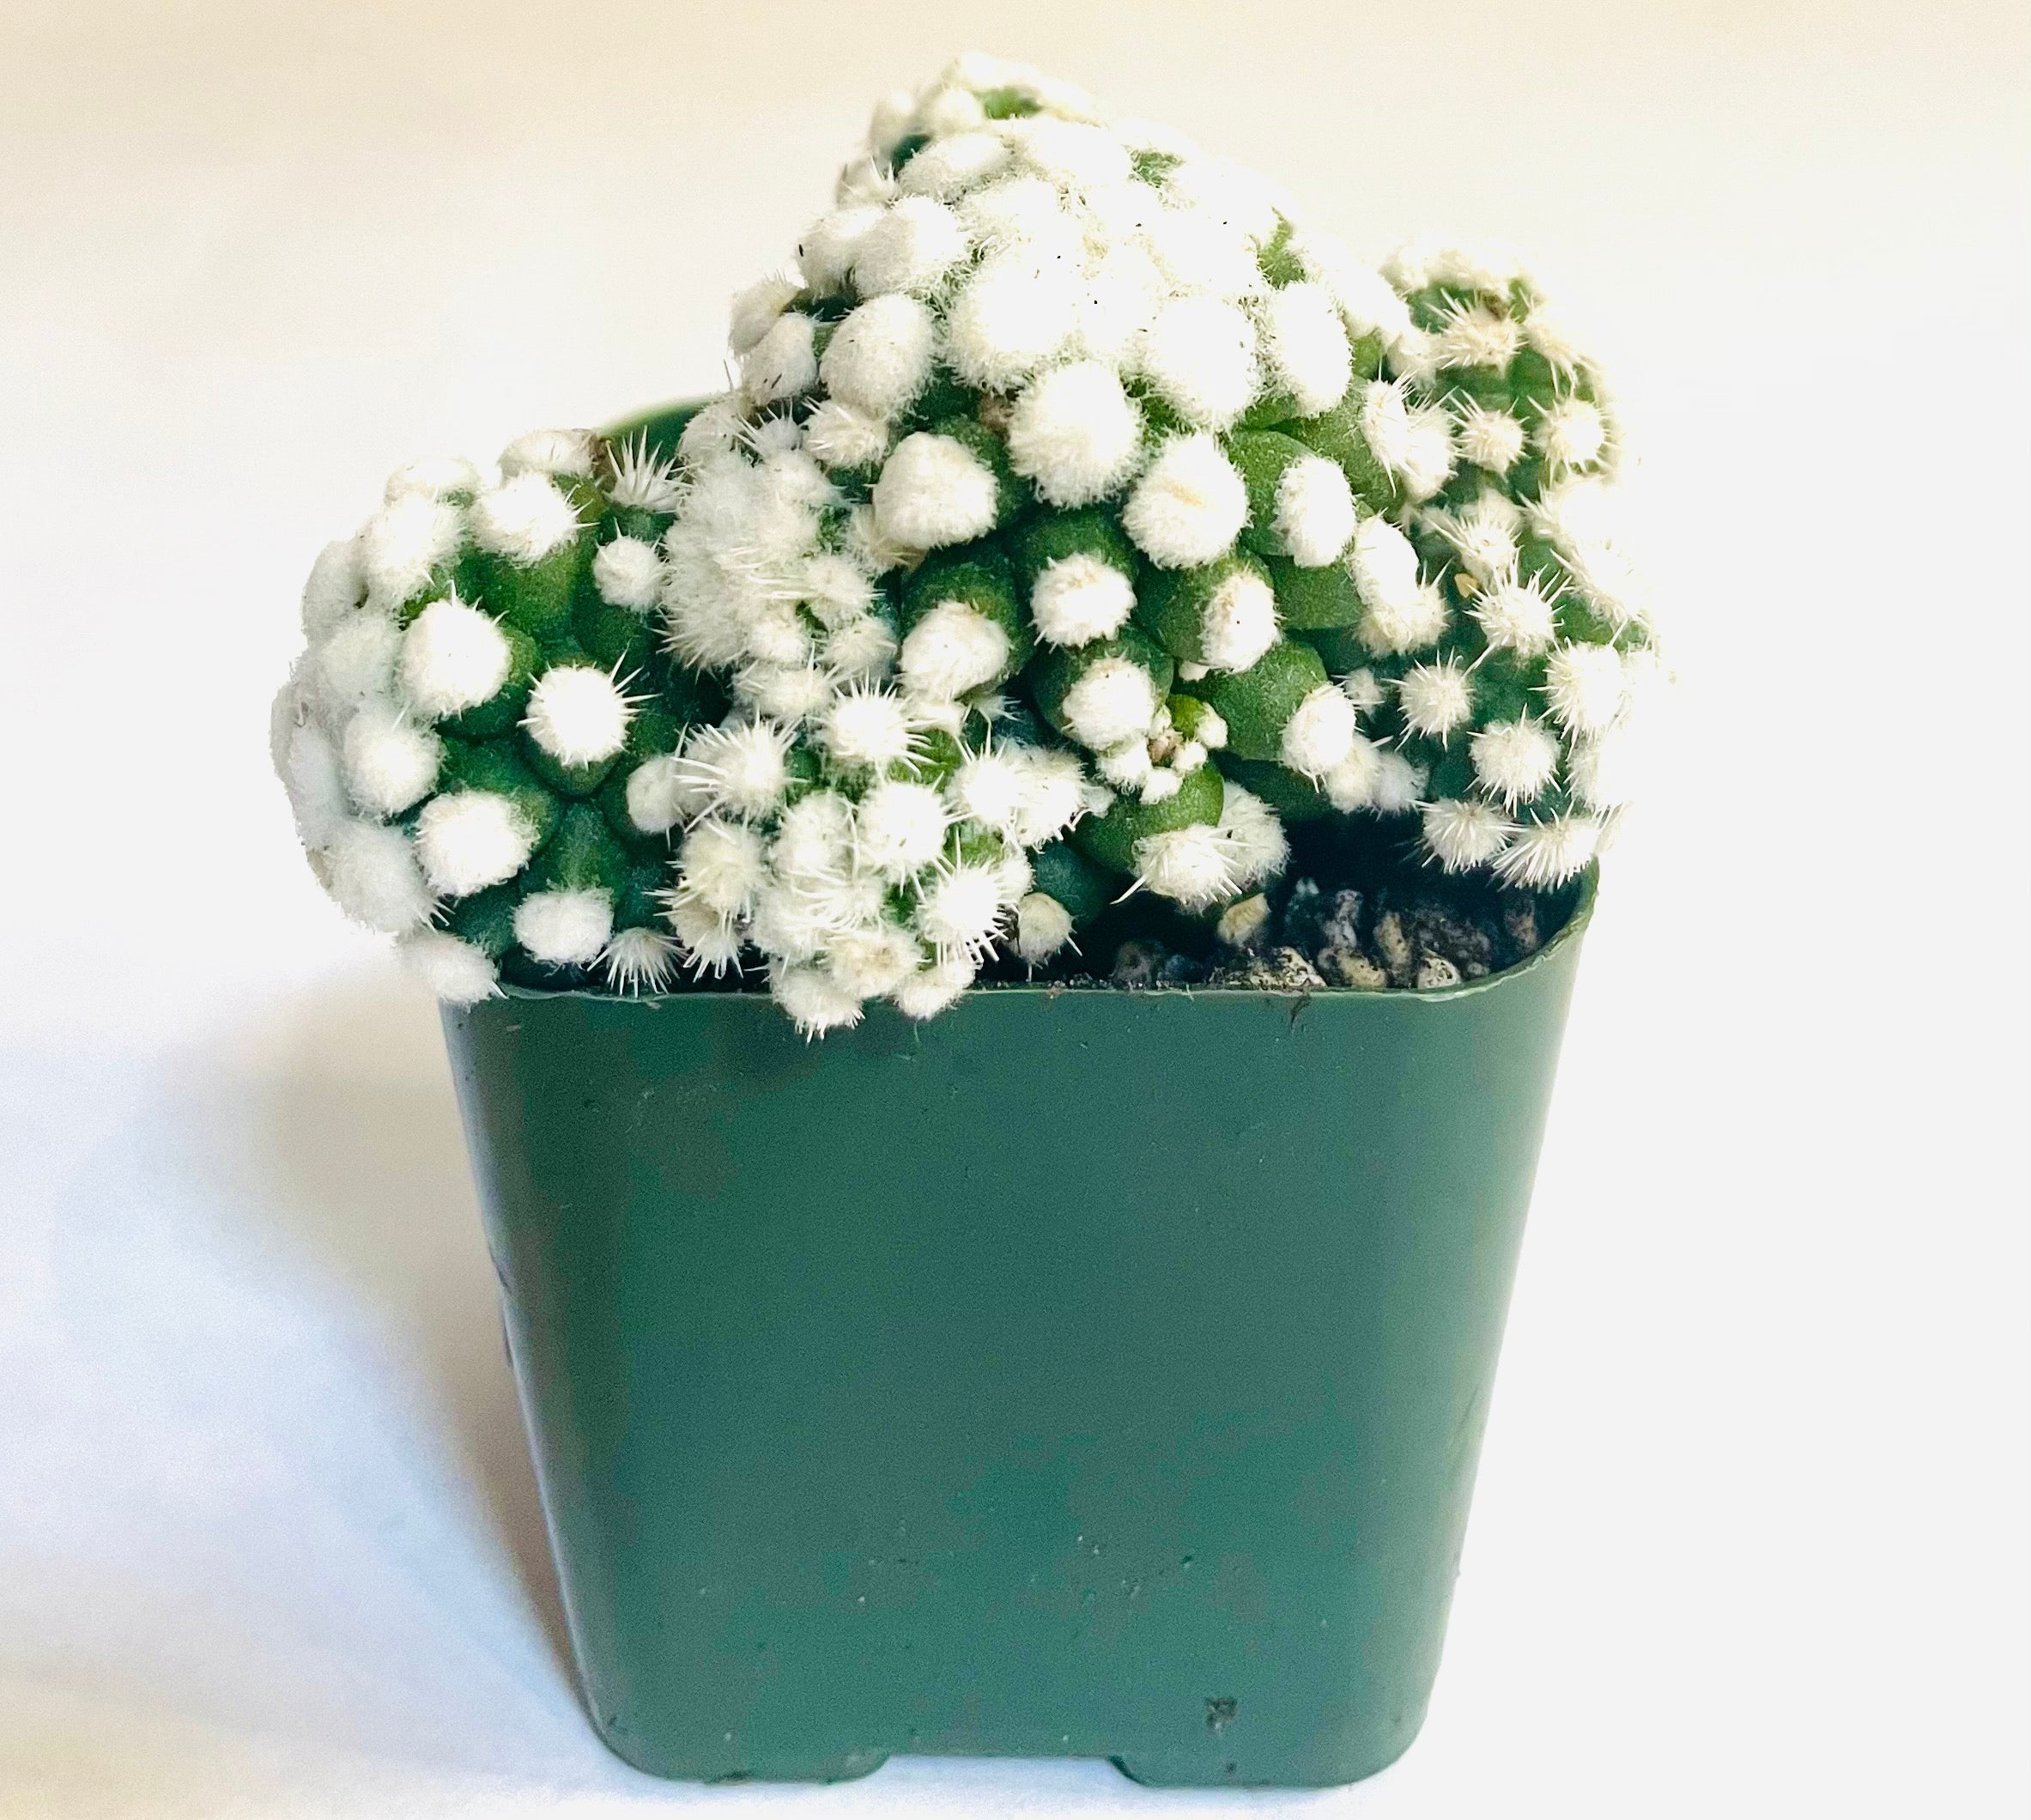 A closeup of a dense cluster of small globe-shaped cacti, which have densely covered in fuzzy white spines, out of which grow small but mostly harmless white spines. Because of the density of the white spots, the cacti almost appear to be entirely white in appearance.